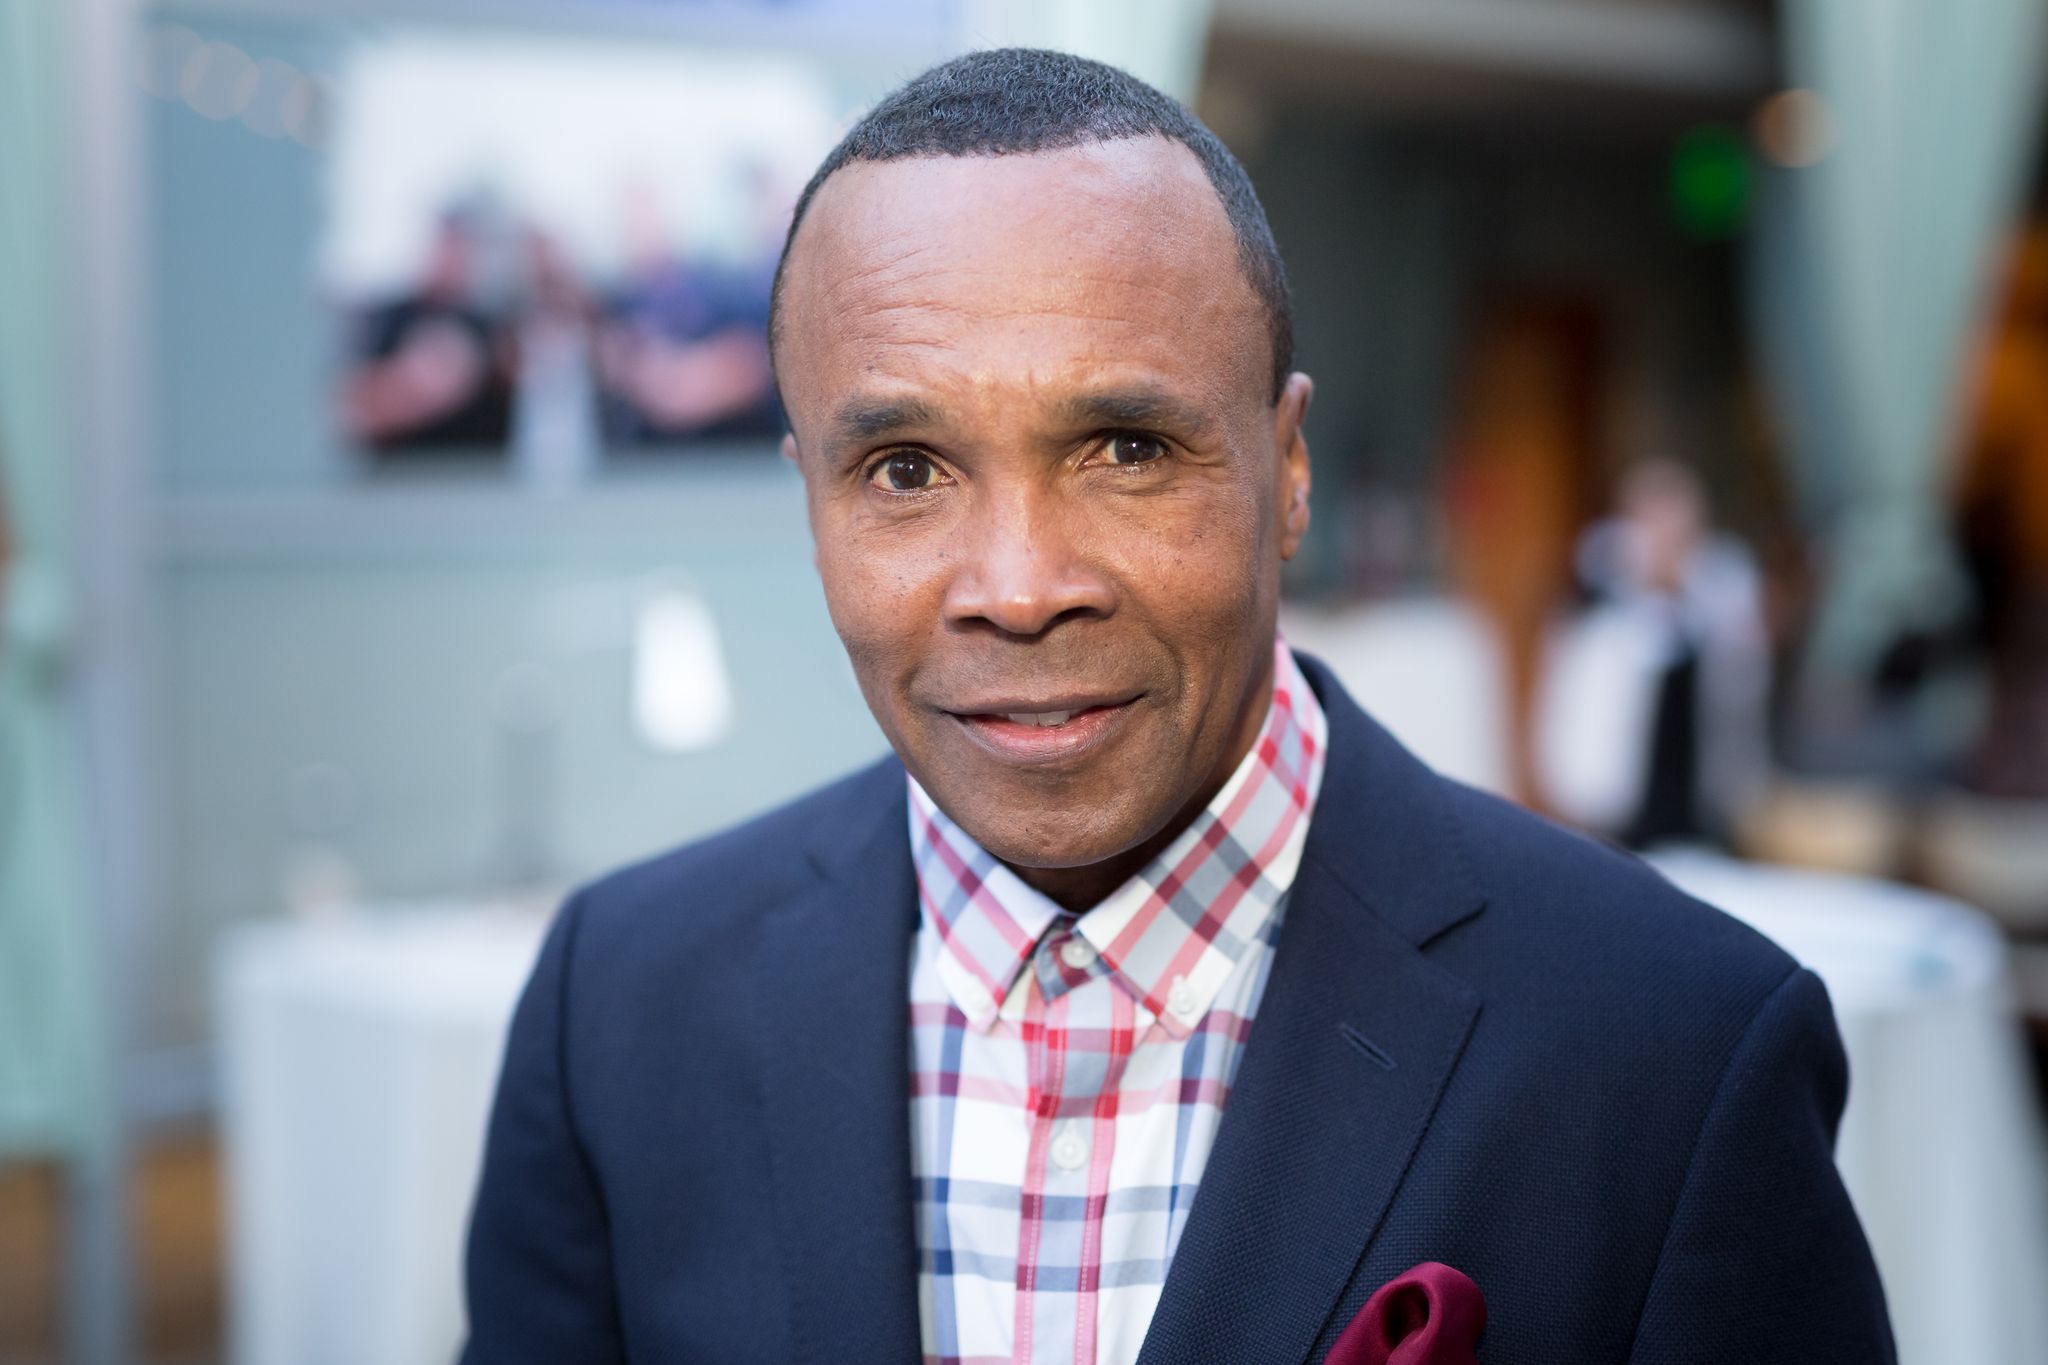 Sugar Ray Leonard at the Annual SKECHERS Pier to Pier Friendship Walk Evening of Celebration and Check Presentation on March 1, 2018 in California. | Photo: Getty Images